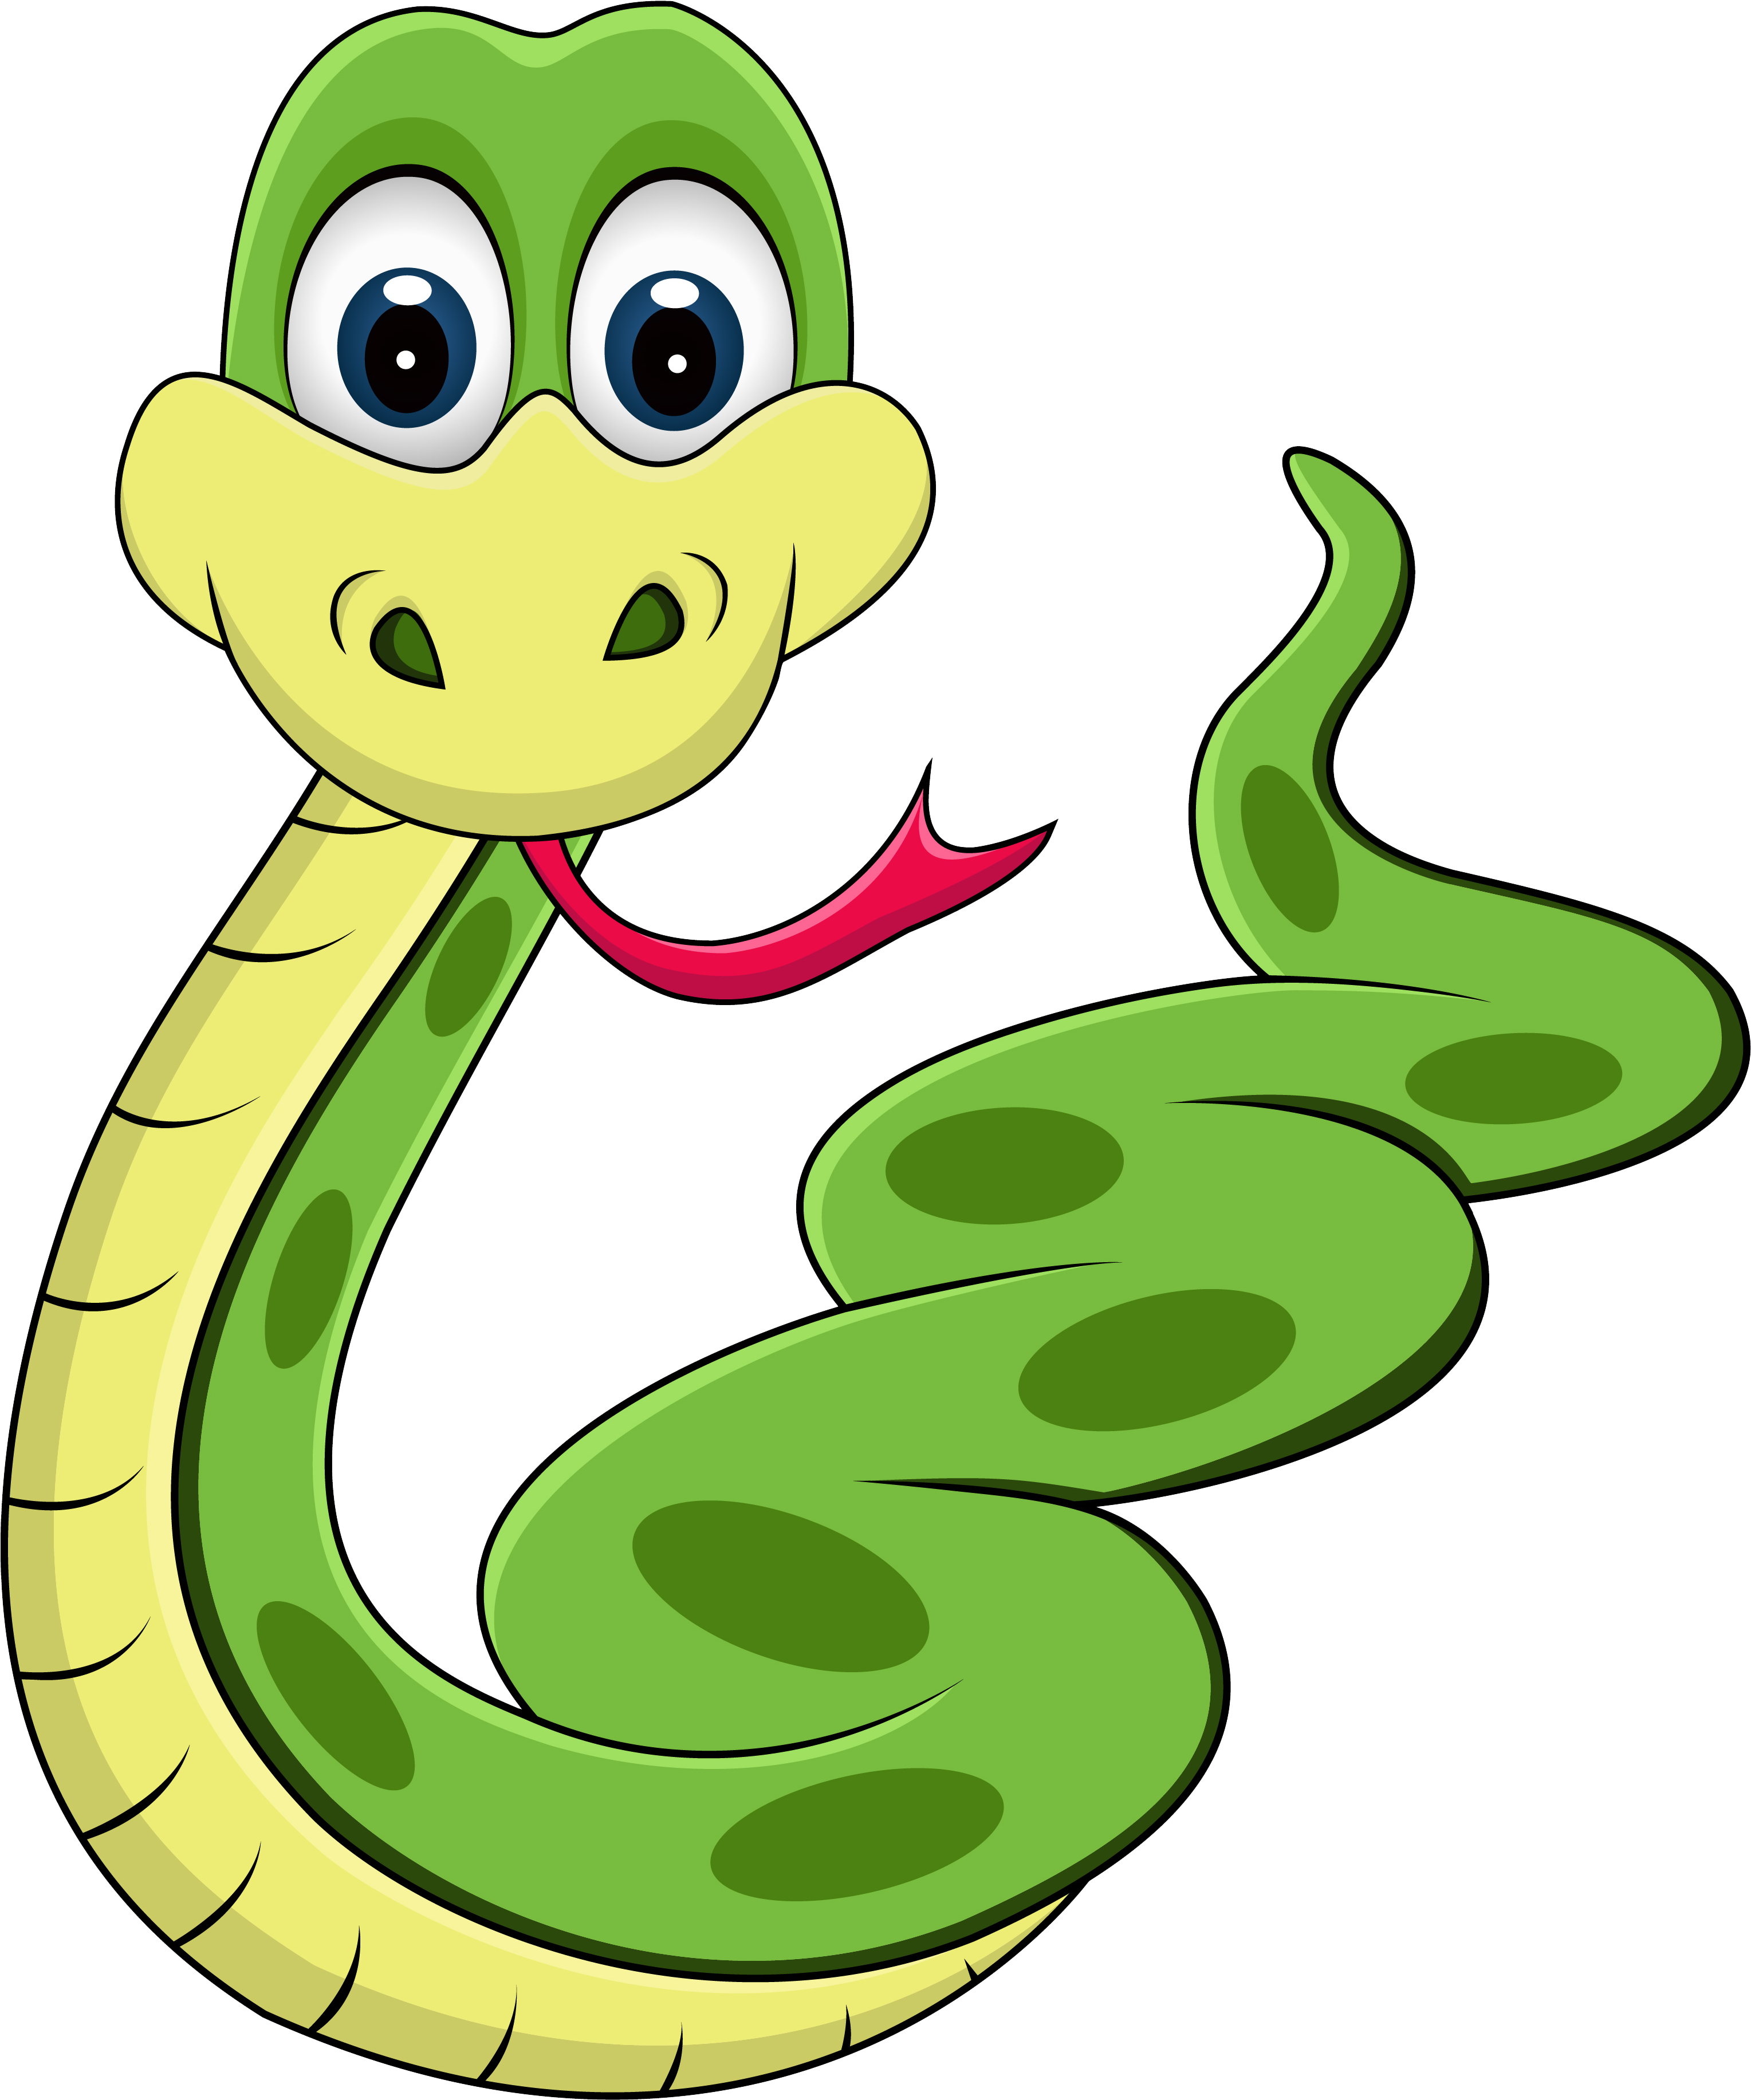 Funny Cartoon Snake Images - Python Guide For Complete Beginners (3066x3704)